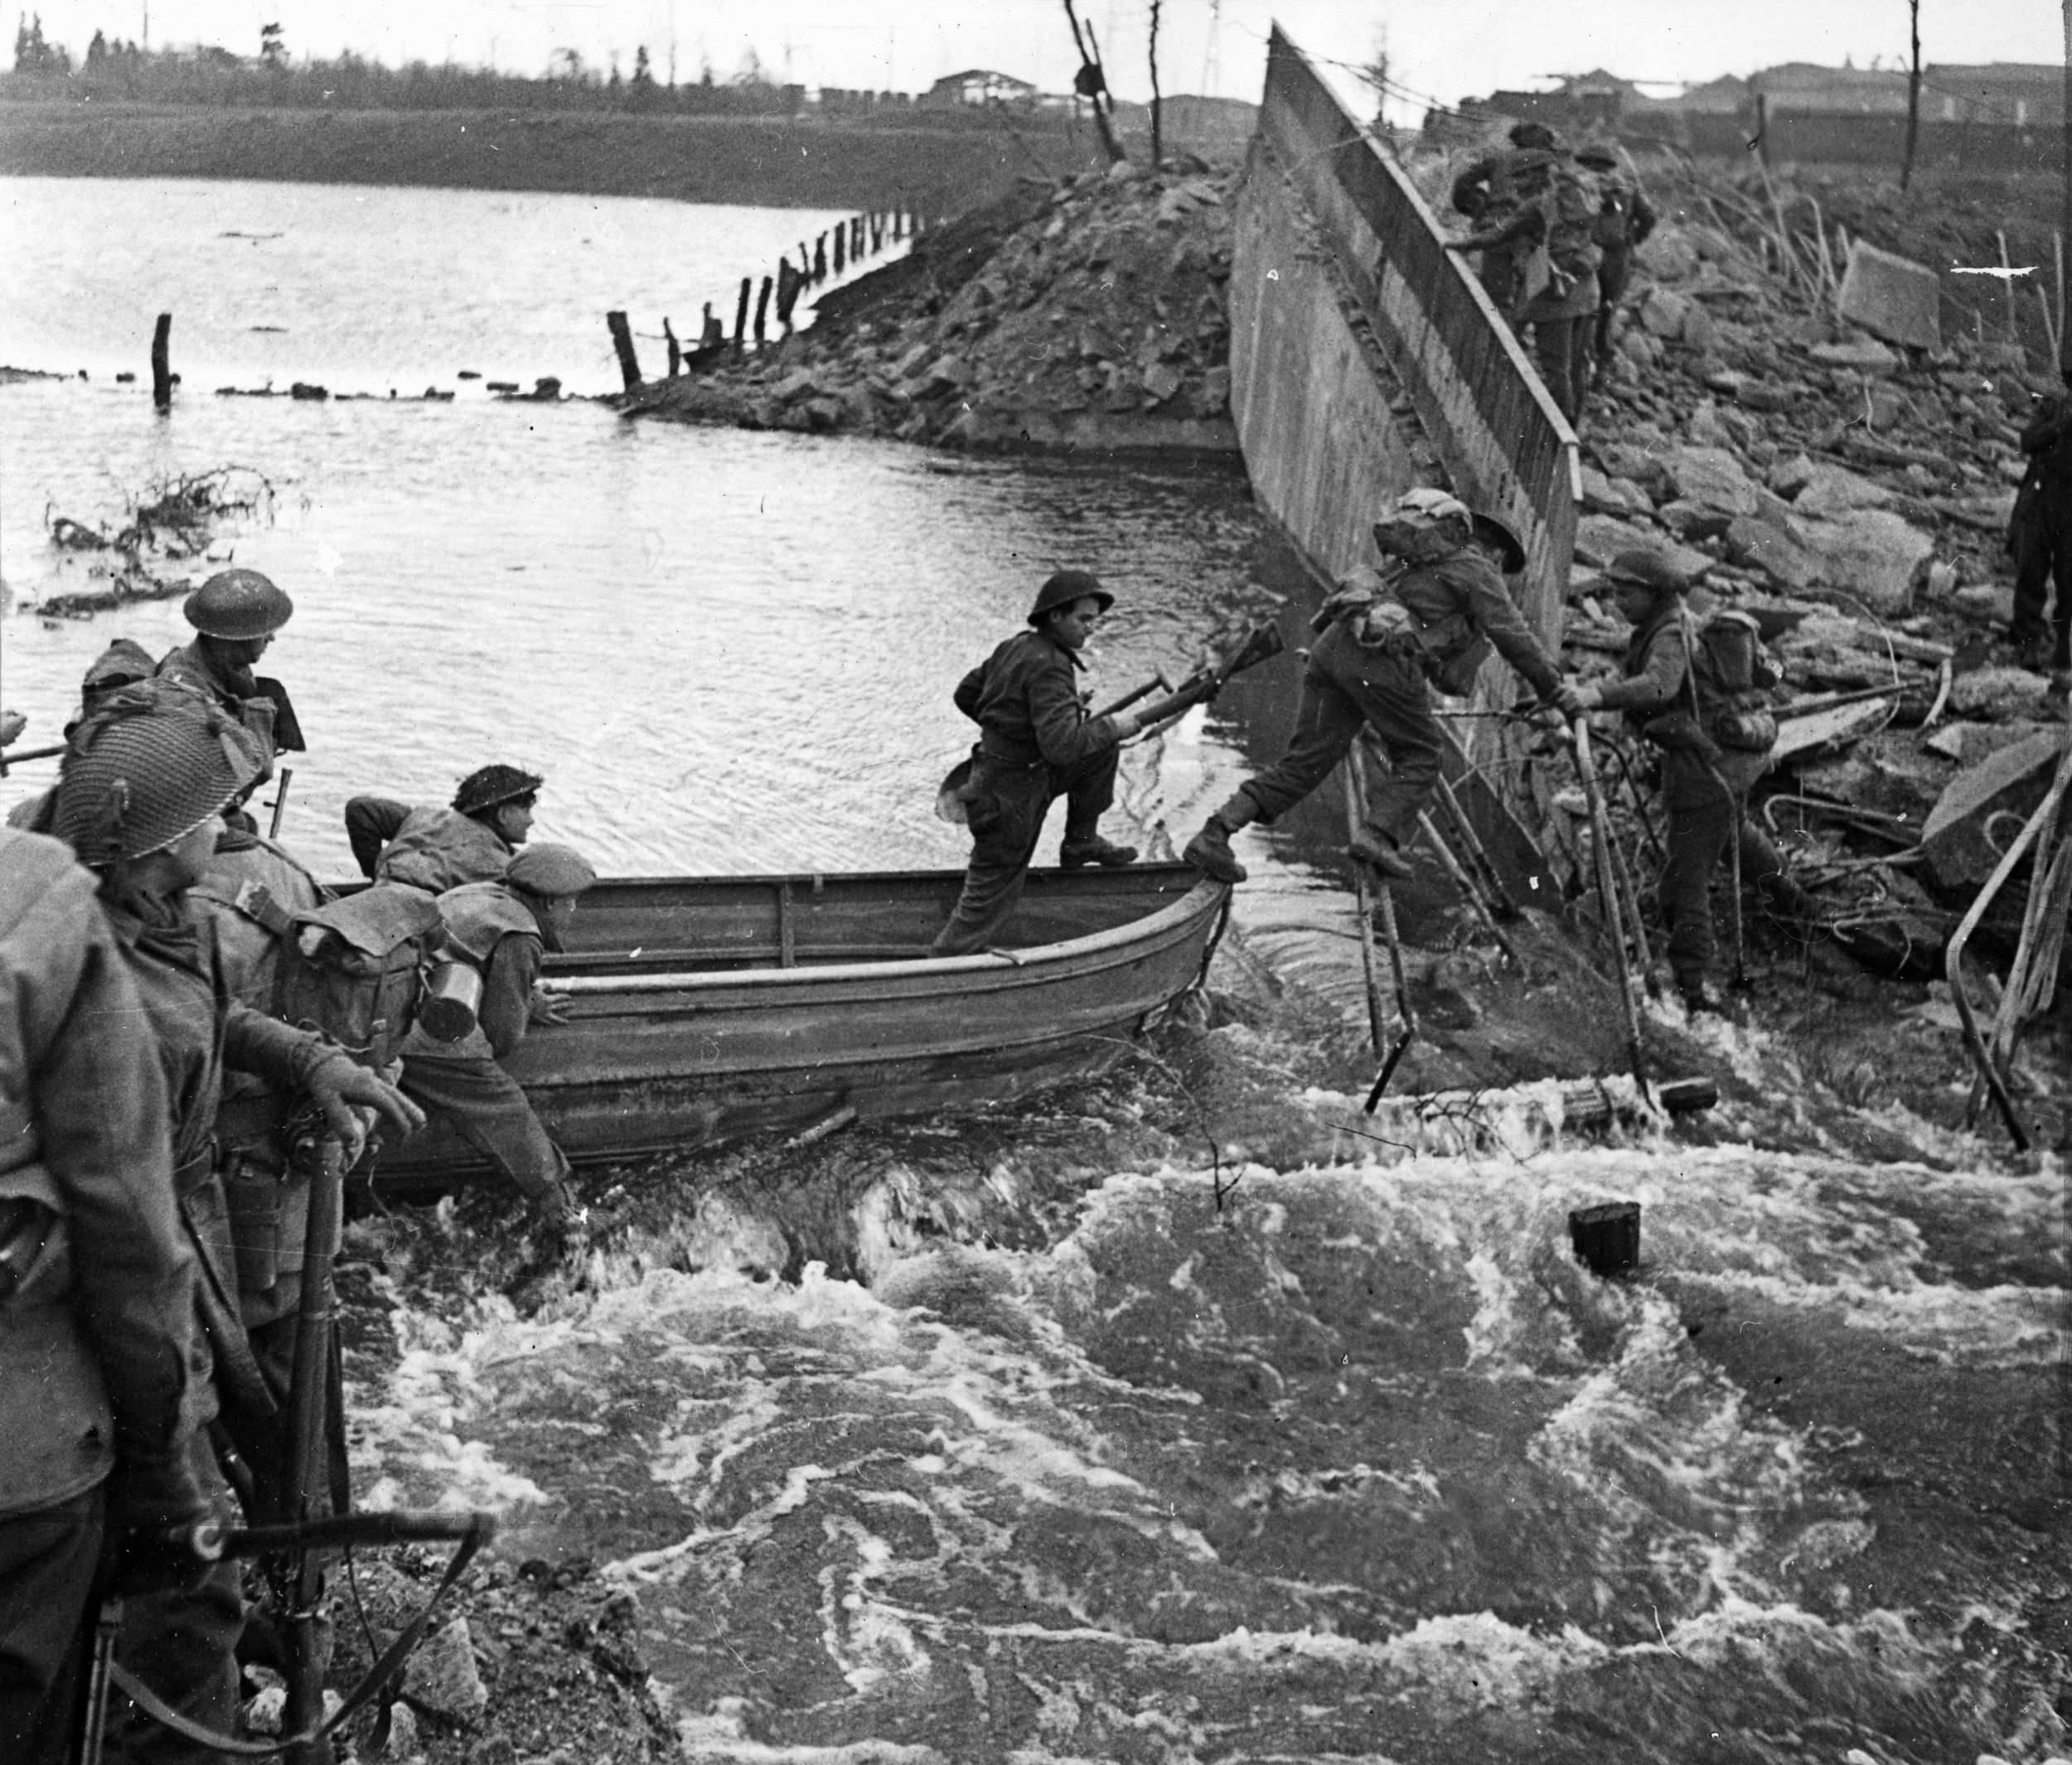 After crossing the Niers River on March 2, 1945, British soldiers exit their small boats and scramble up the riverbank. Their objective was the nearby town of Weeze.